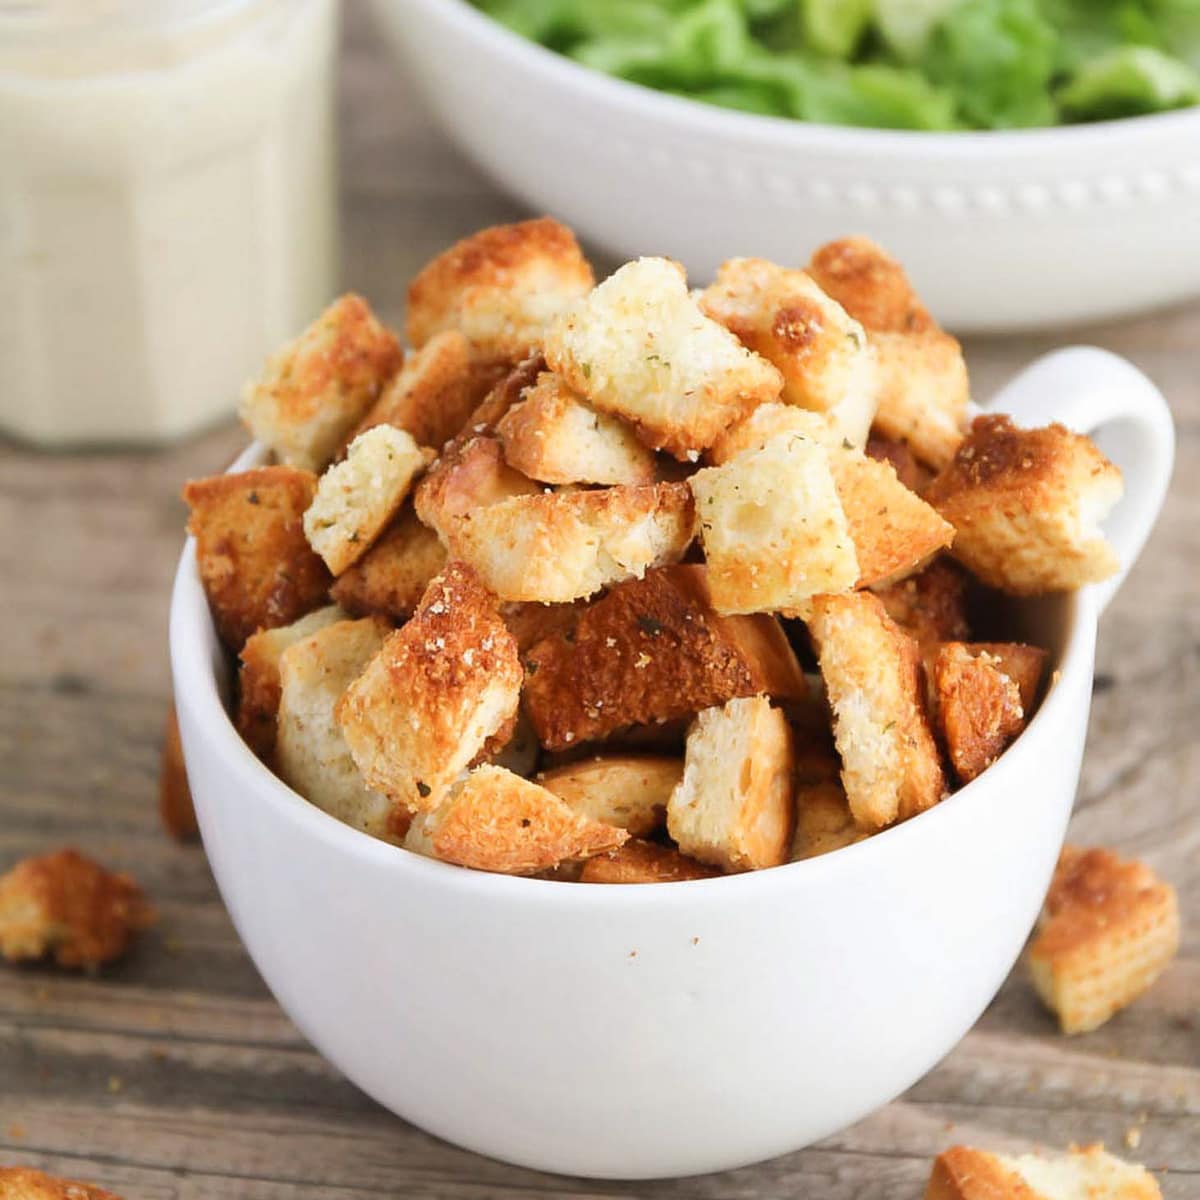 Homemade croutons served in a white bowl.